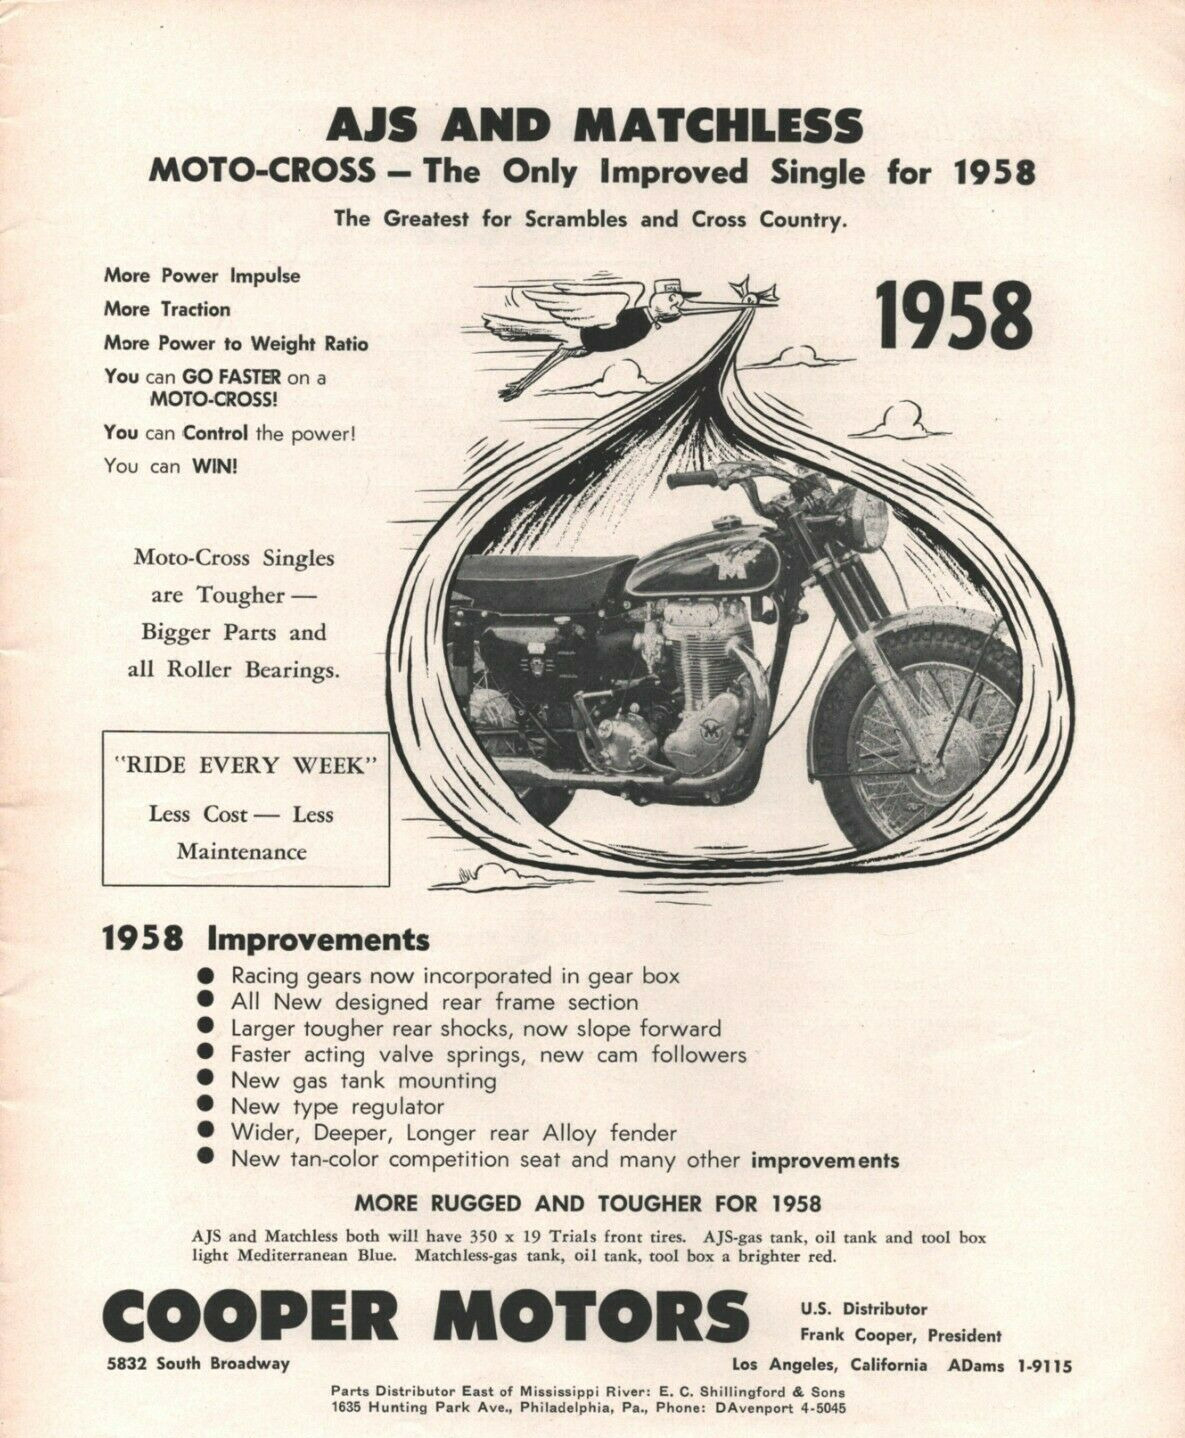 1958 AJS Matchless Motocross Cooper Motors - Vintage Motorcycle Ad